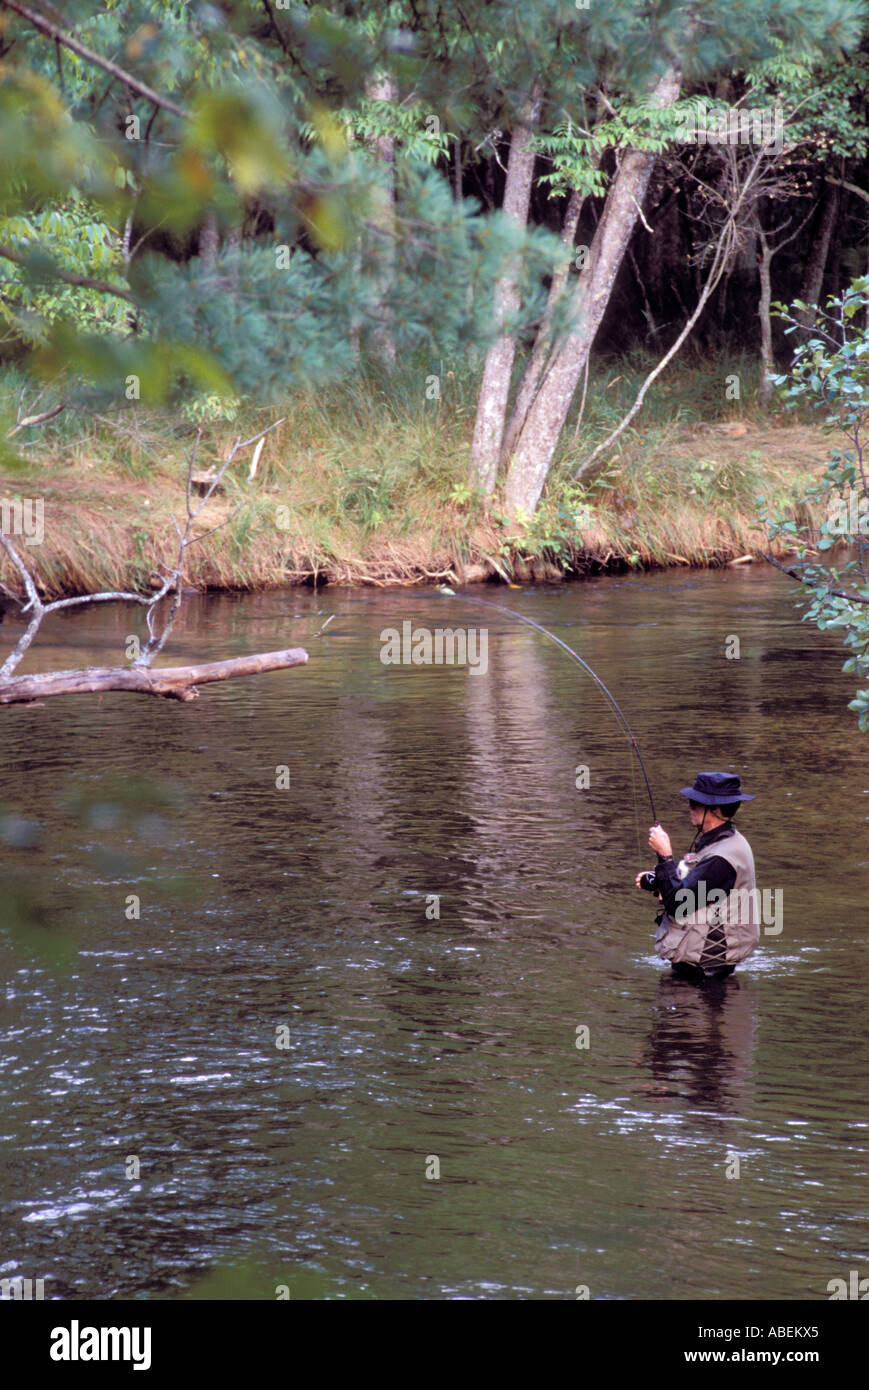 Fly fishing in river Stock Photo